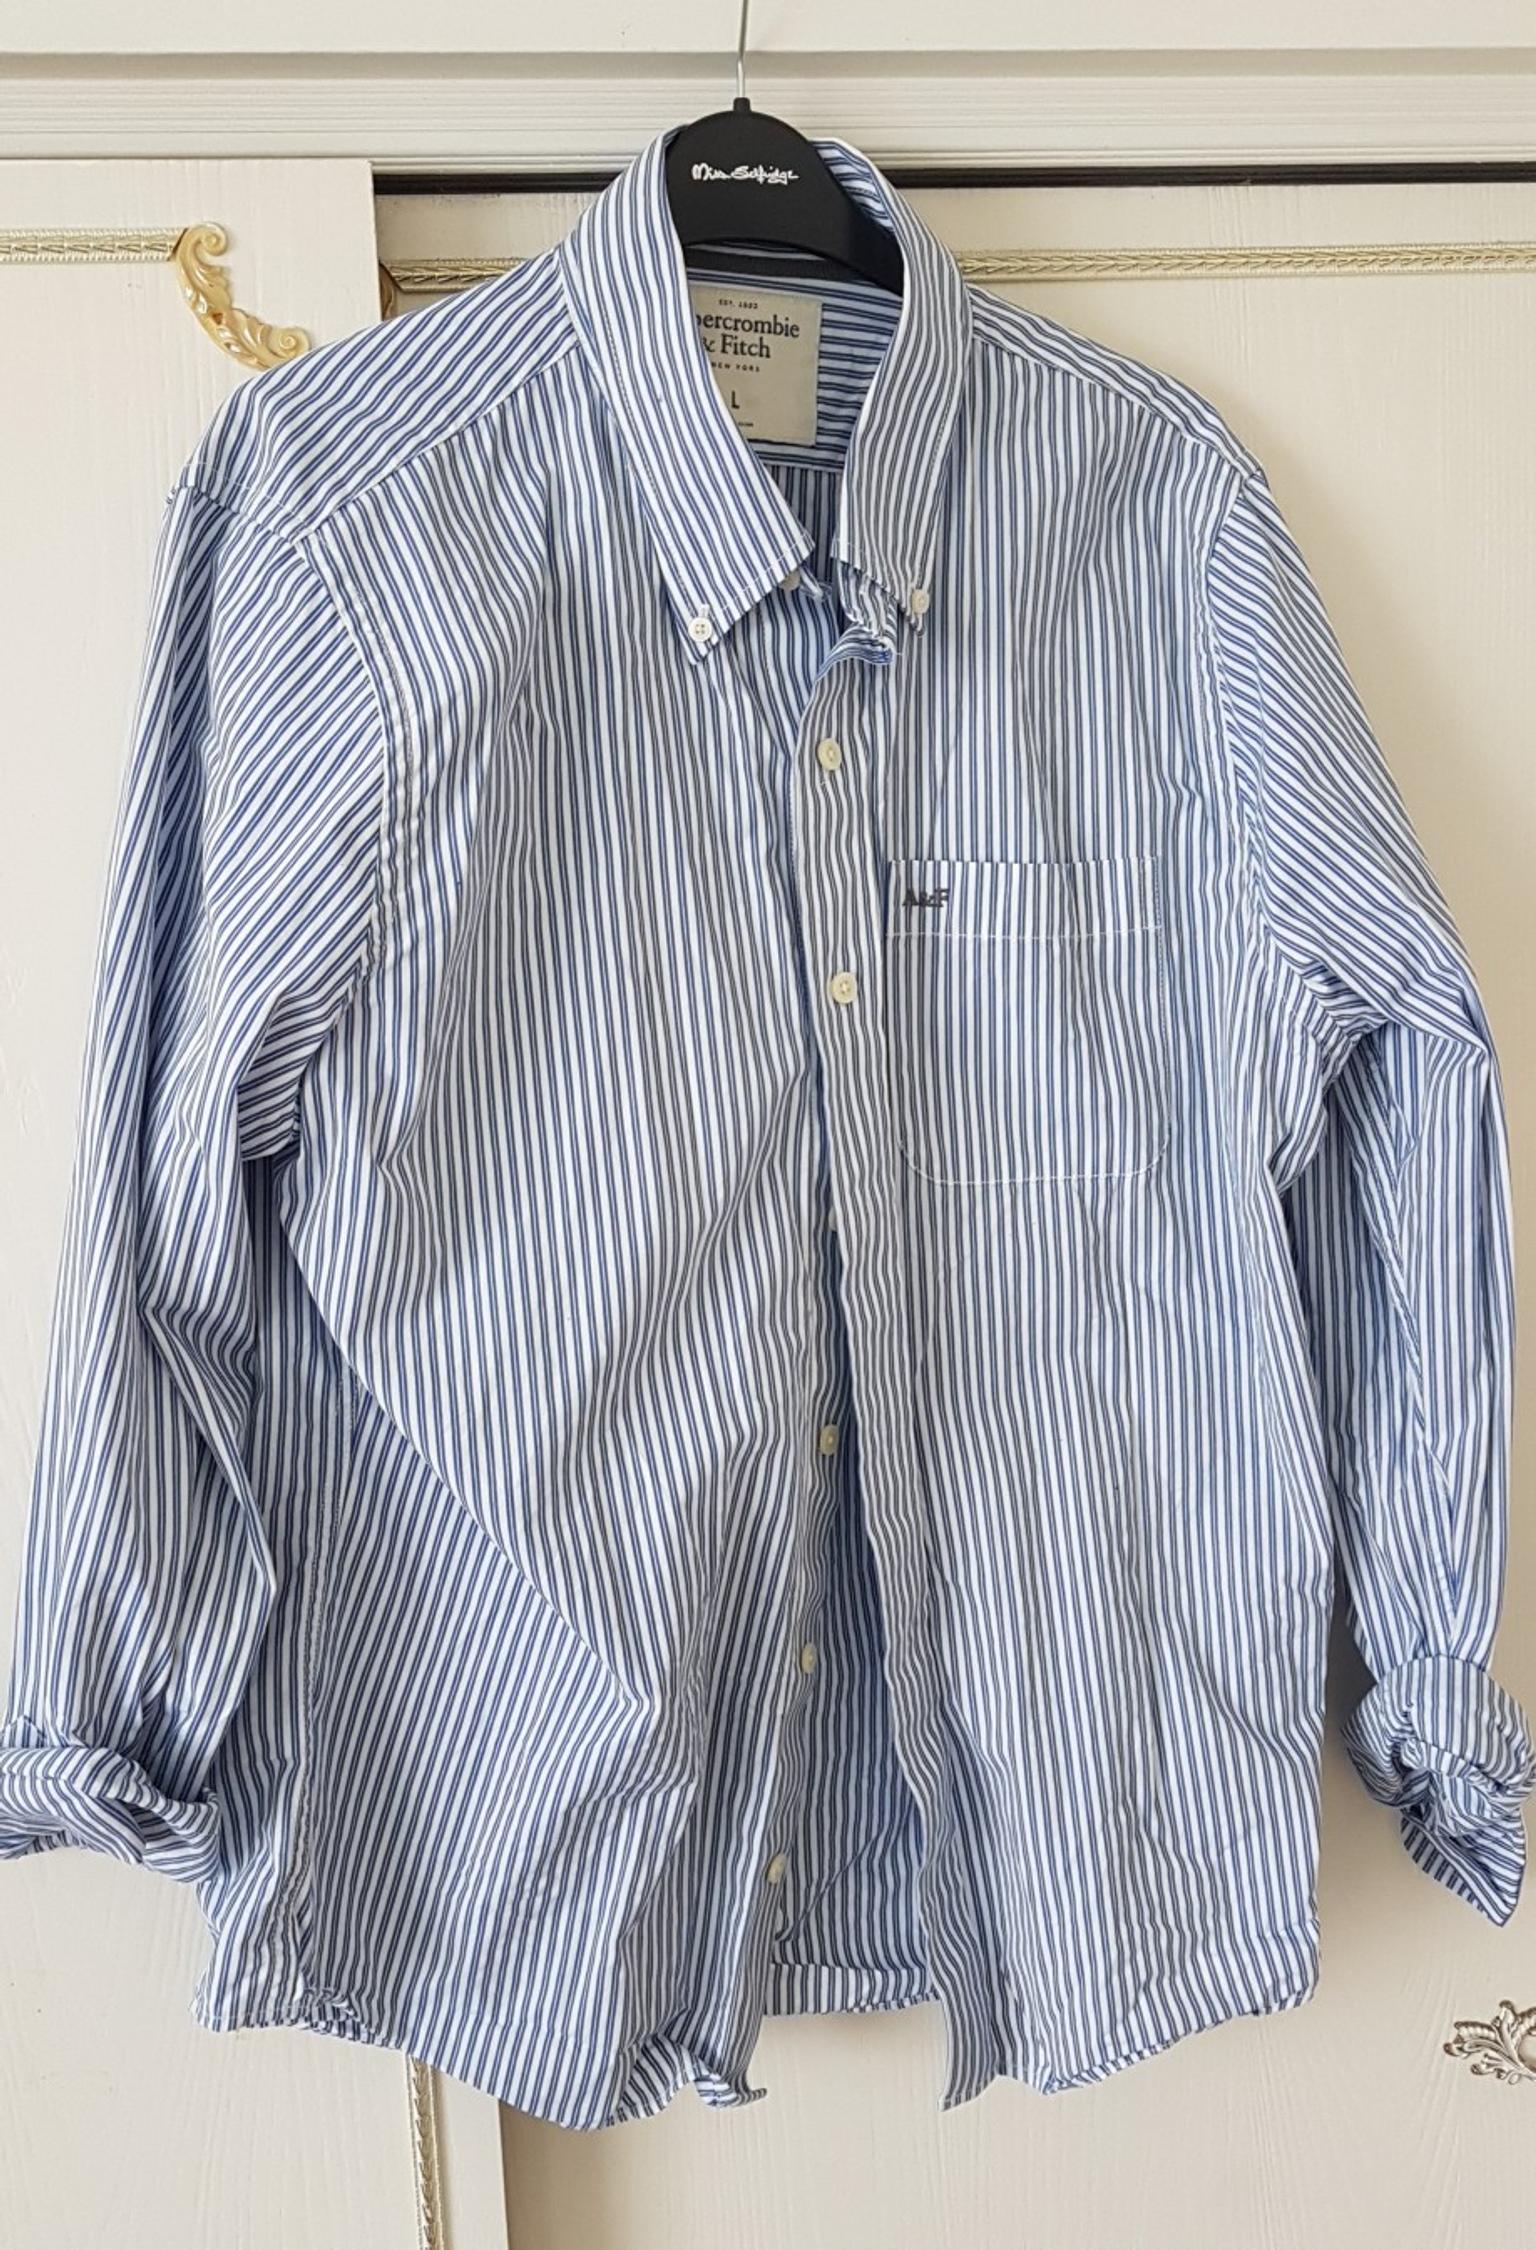 Men's Abercrombie and Fitch shirt in 